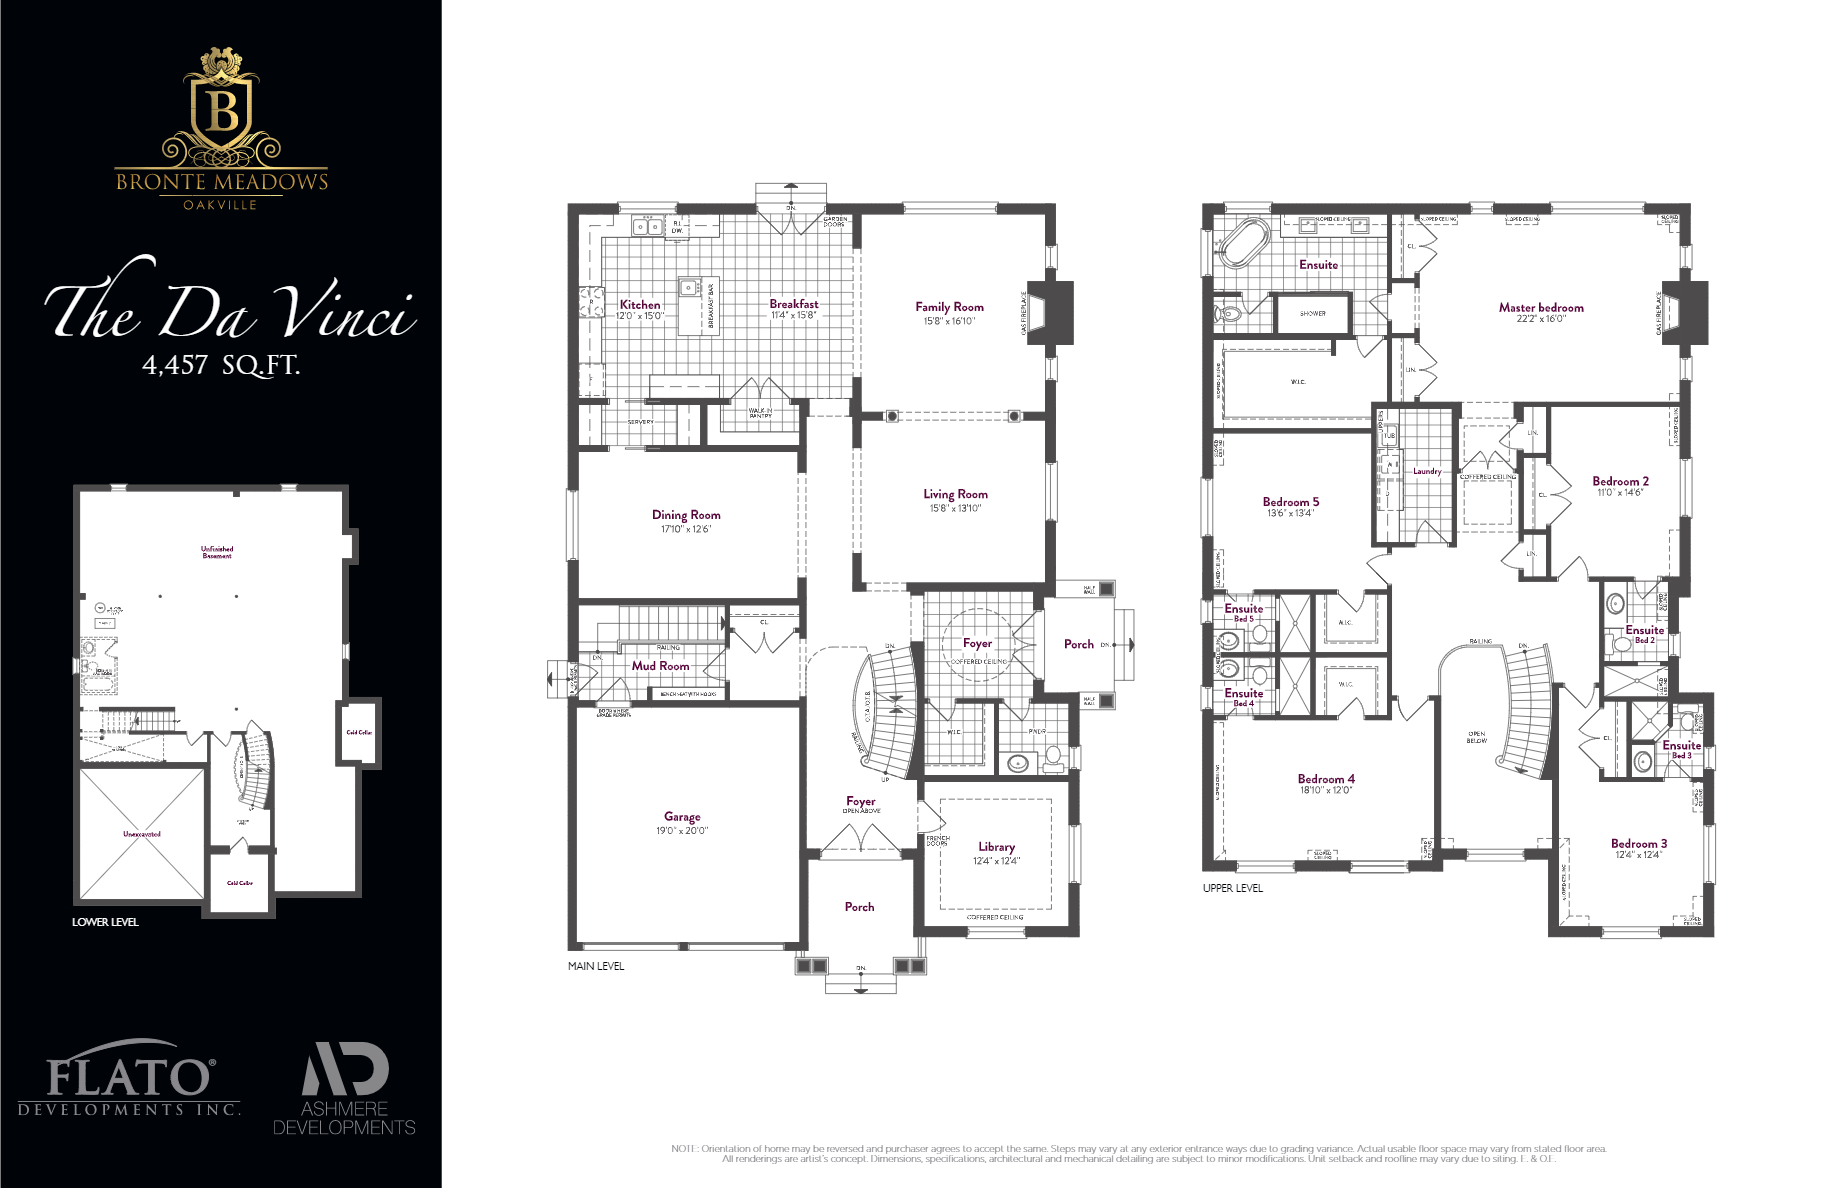  Floor Plan of Bronte Meadows with undefined beds